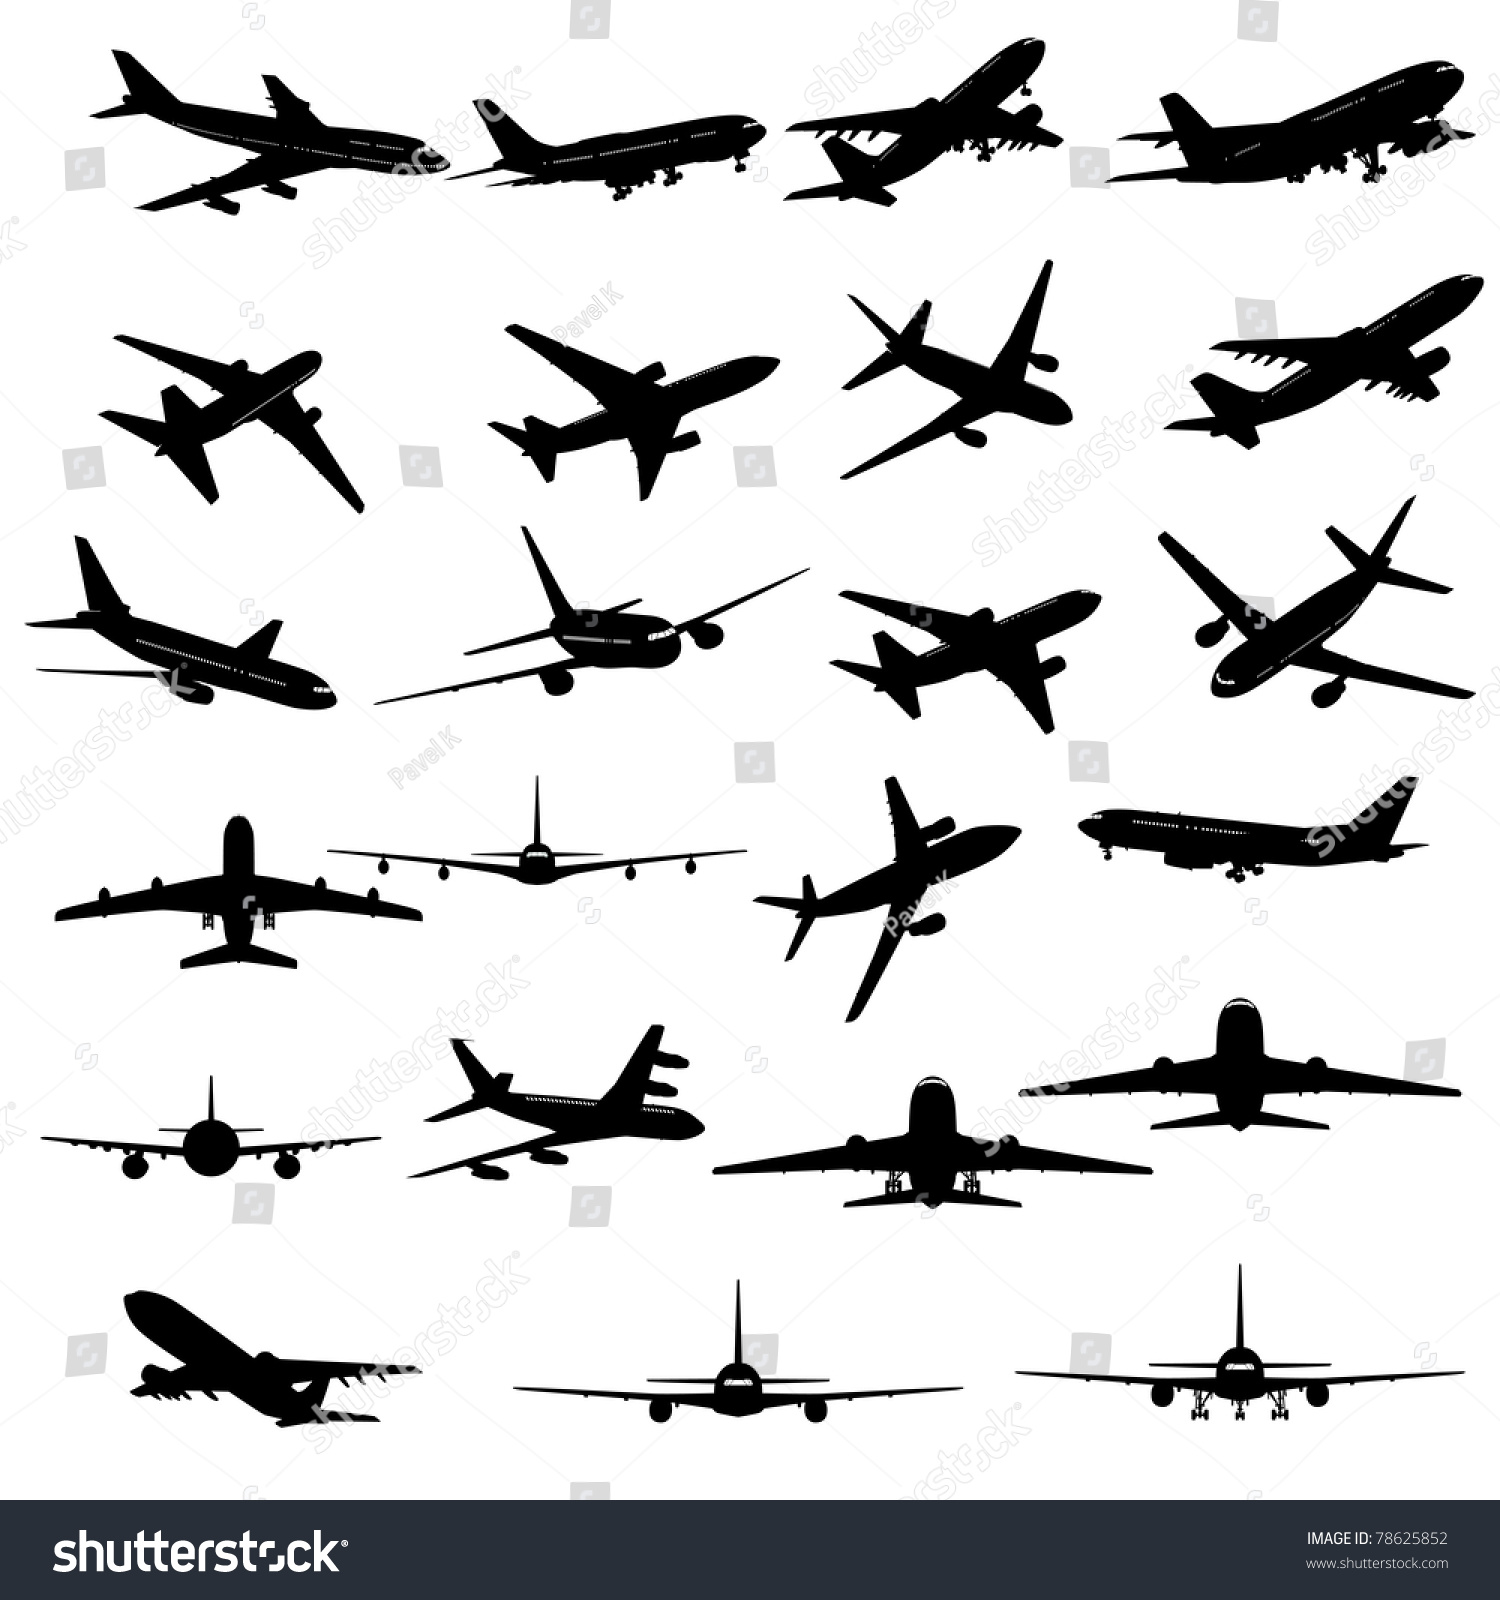 SVG of Big Set of Different Kind of Airplanes Silhouettes. In Flight, Running, Takeoff, Landing, Front, Profile, Back, Up and Bottom Views. High Detail, Very Smooth. Vector Illustration.  svg